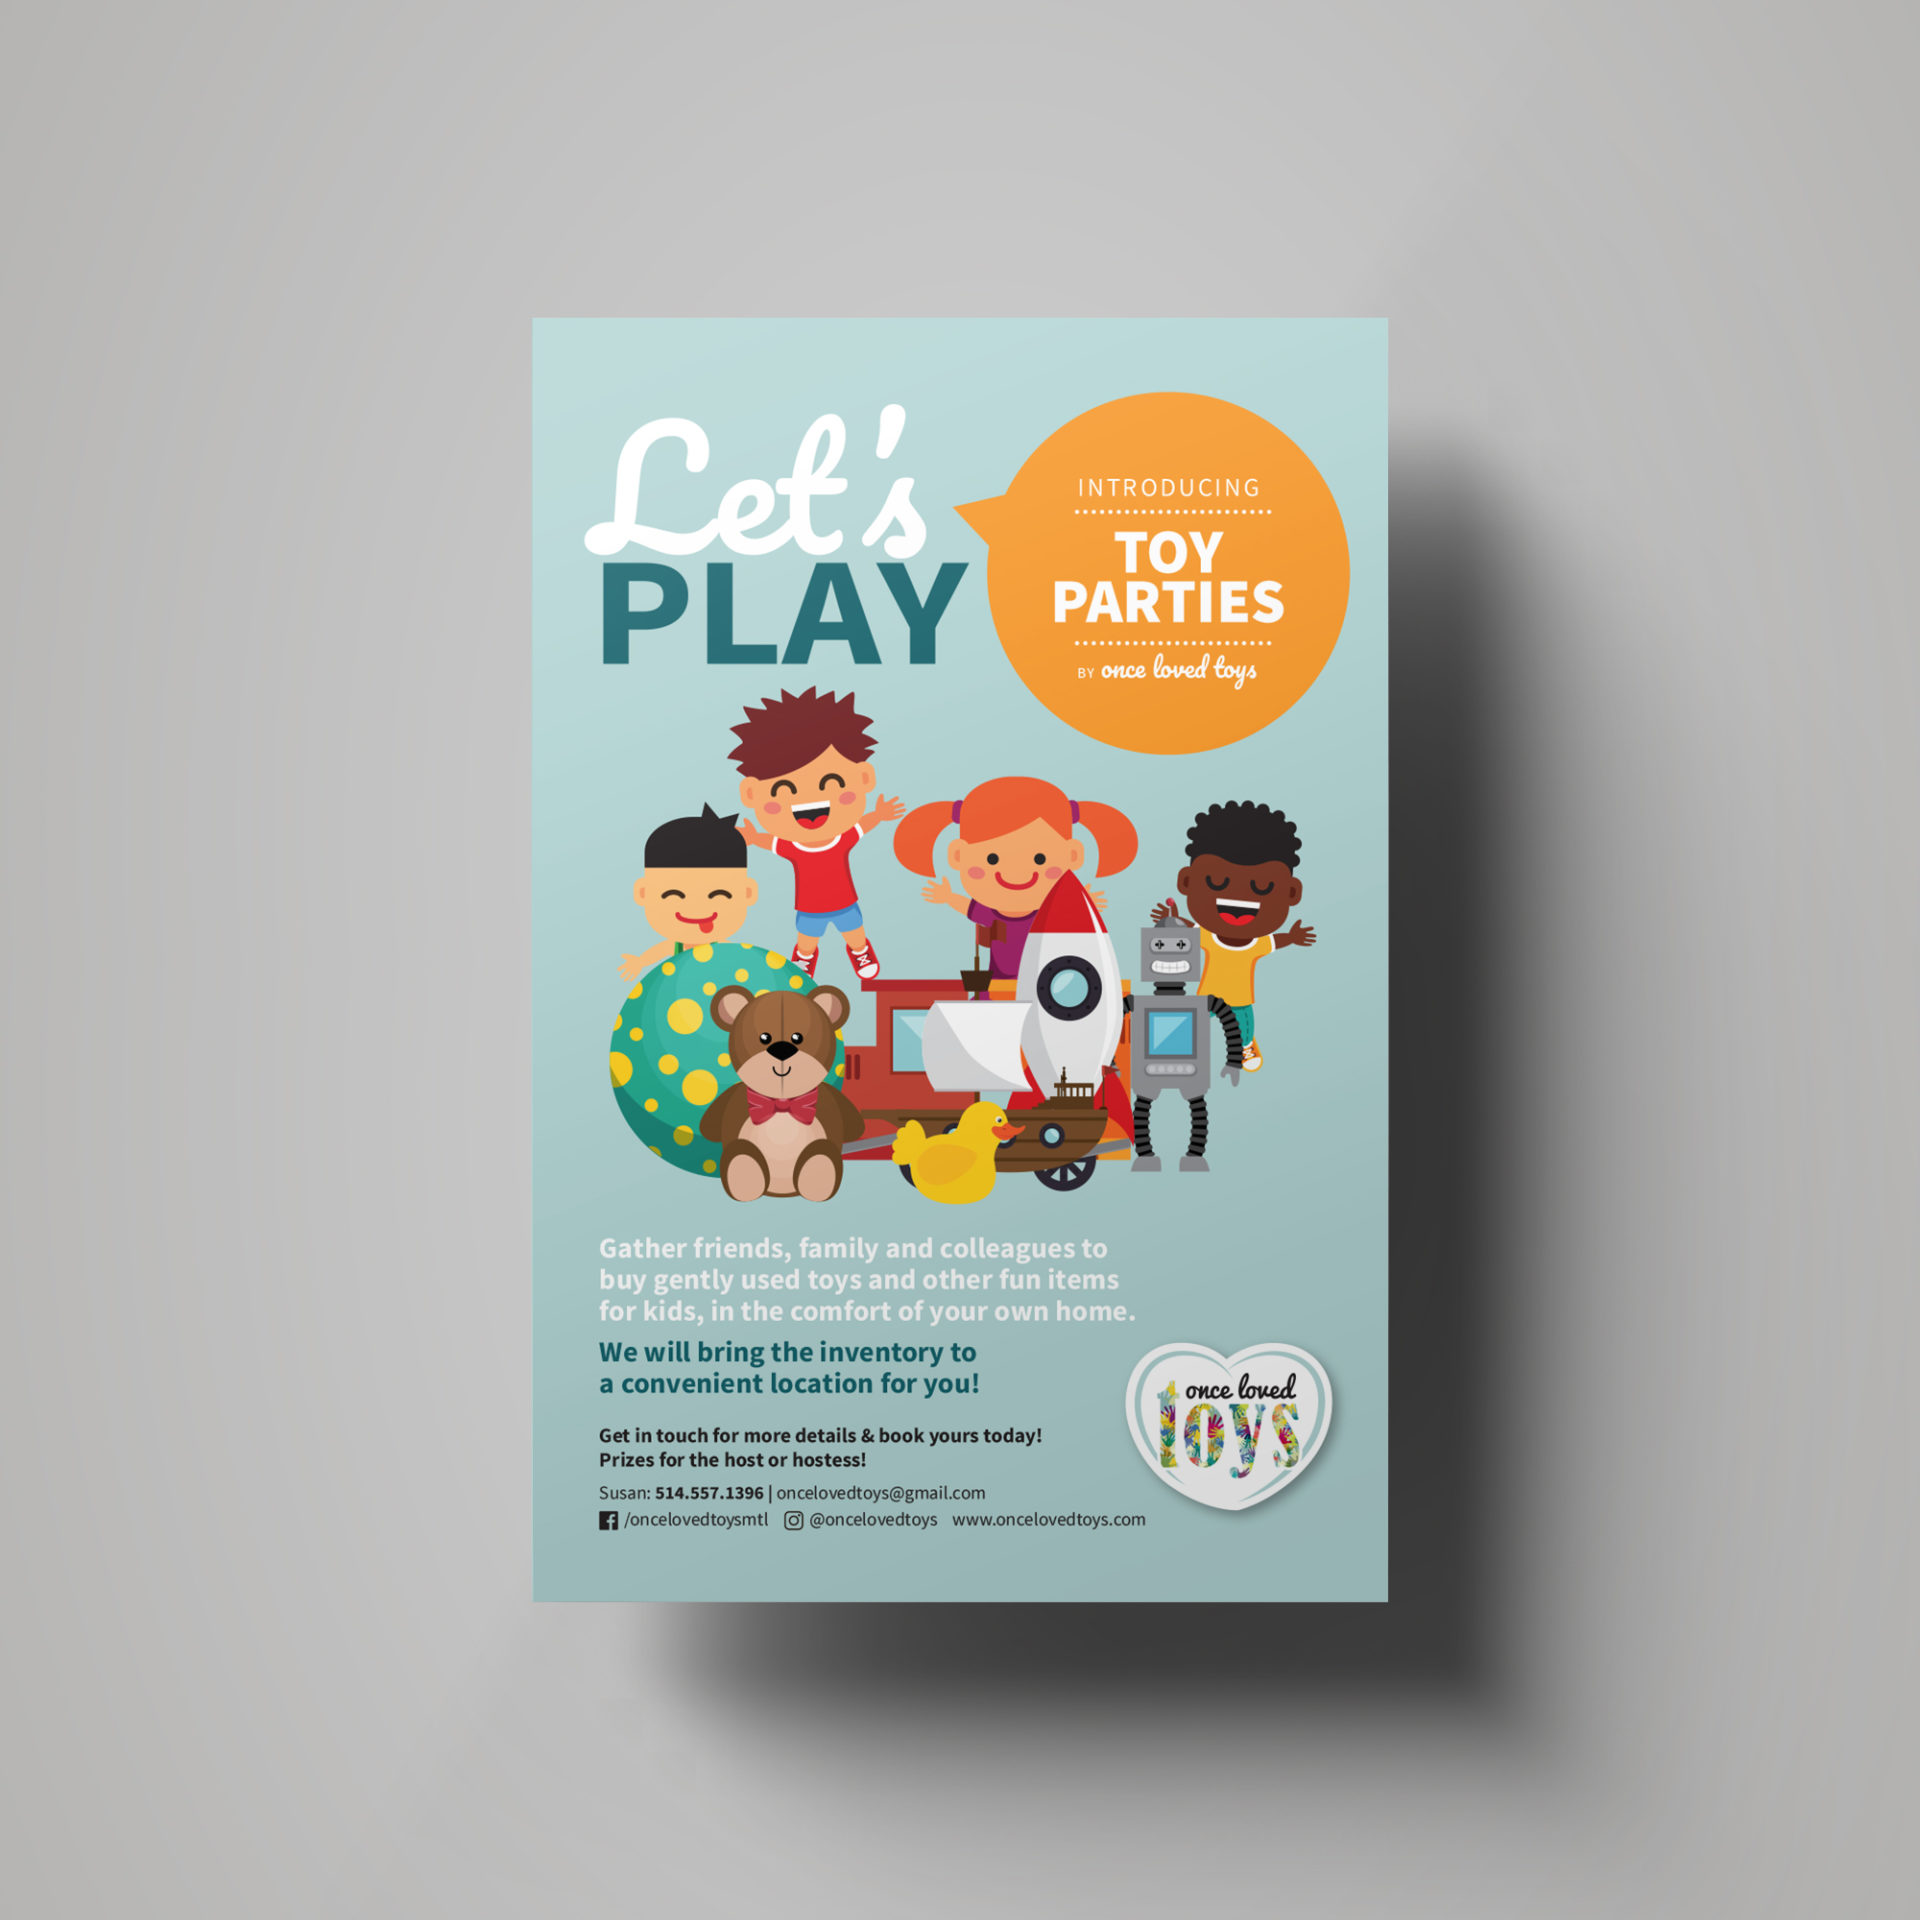 Illustration of multicultural children playing with toys with the caption 'Let's Play - introducing Once Loved Toys'